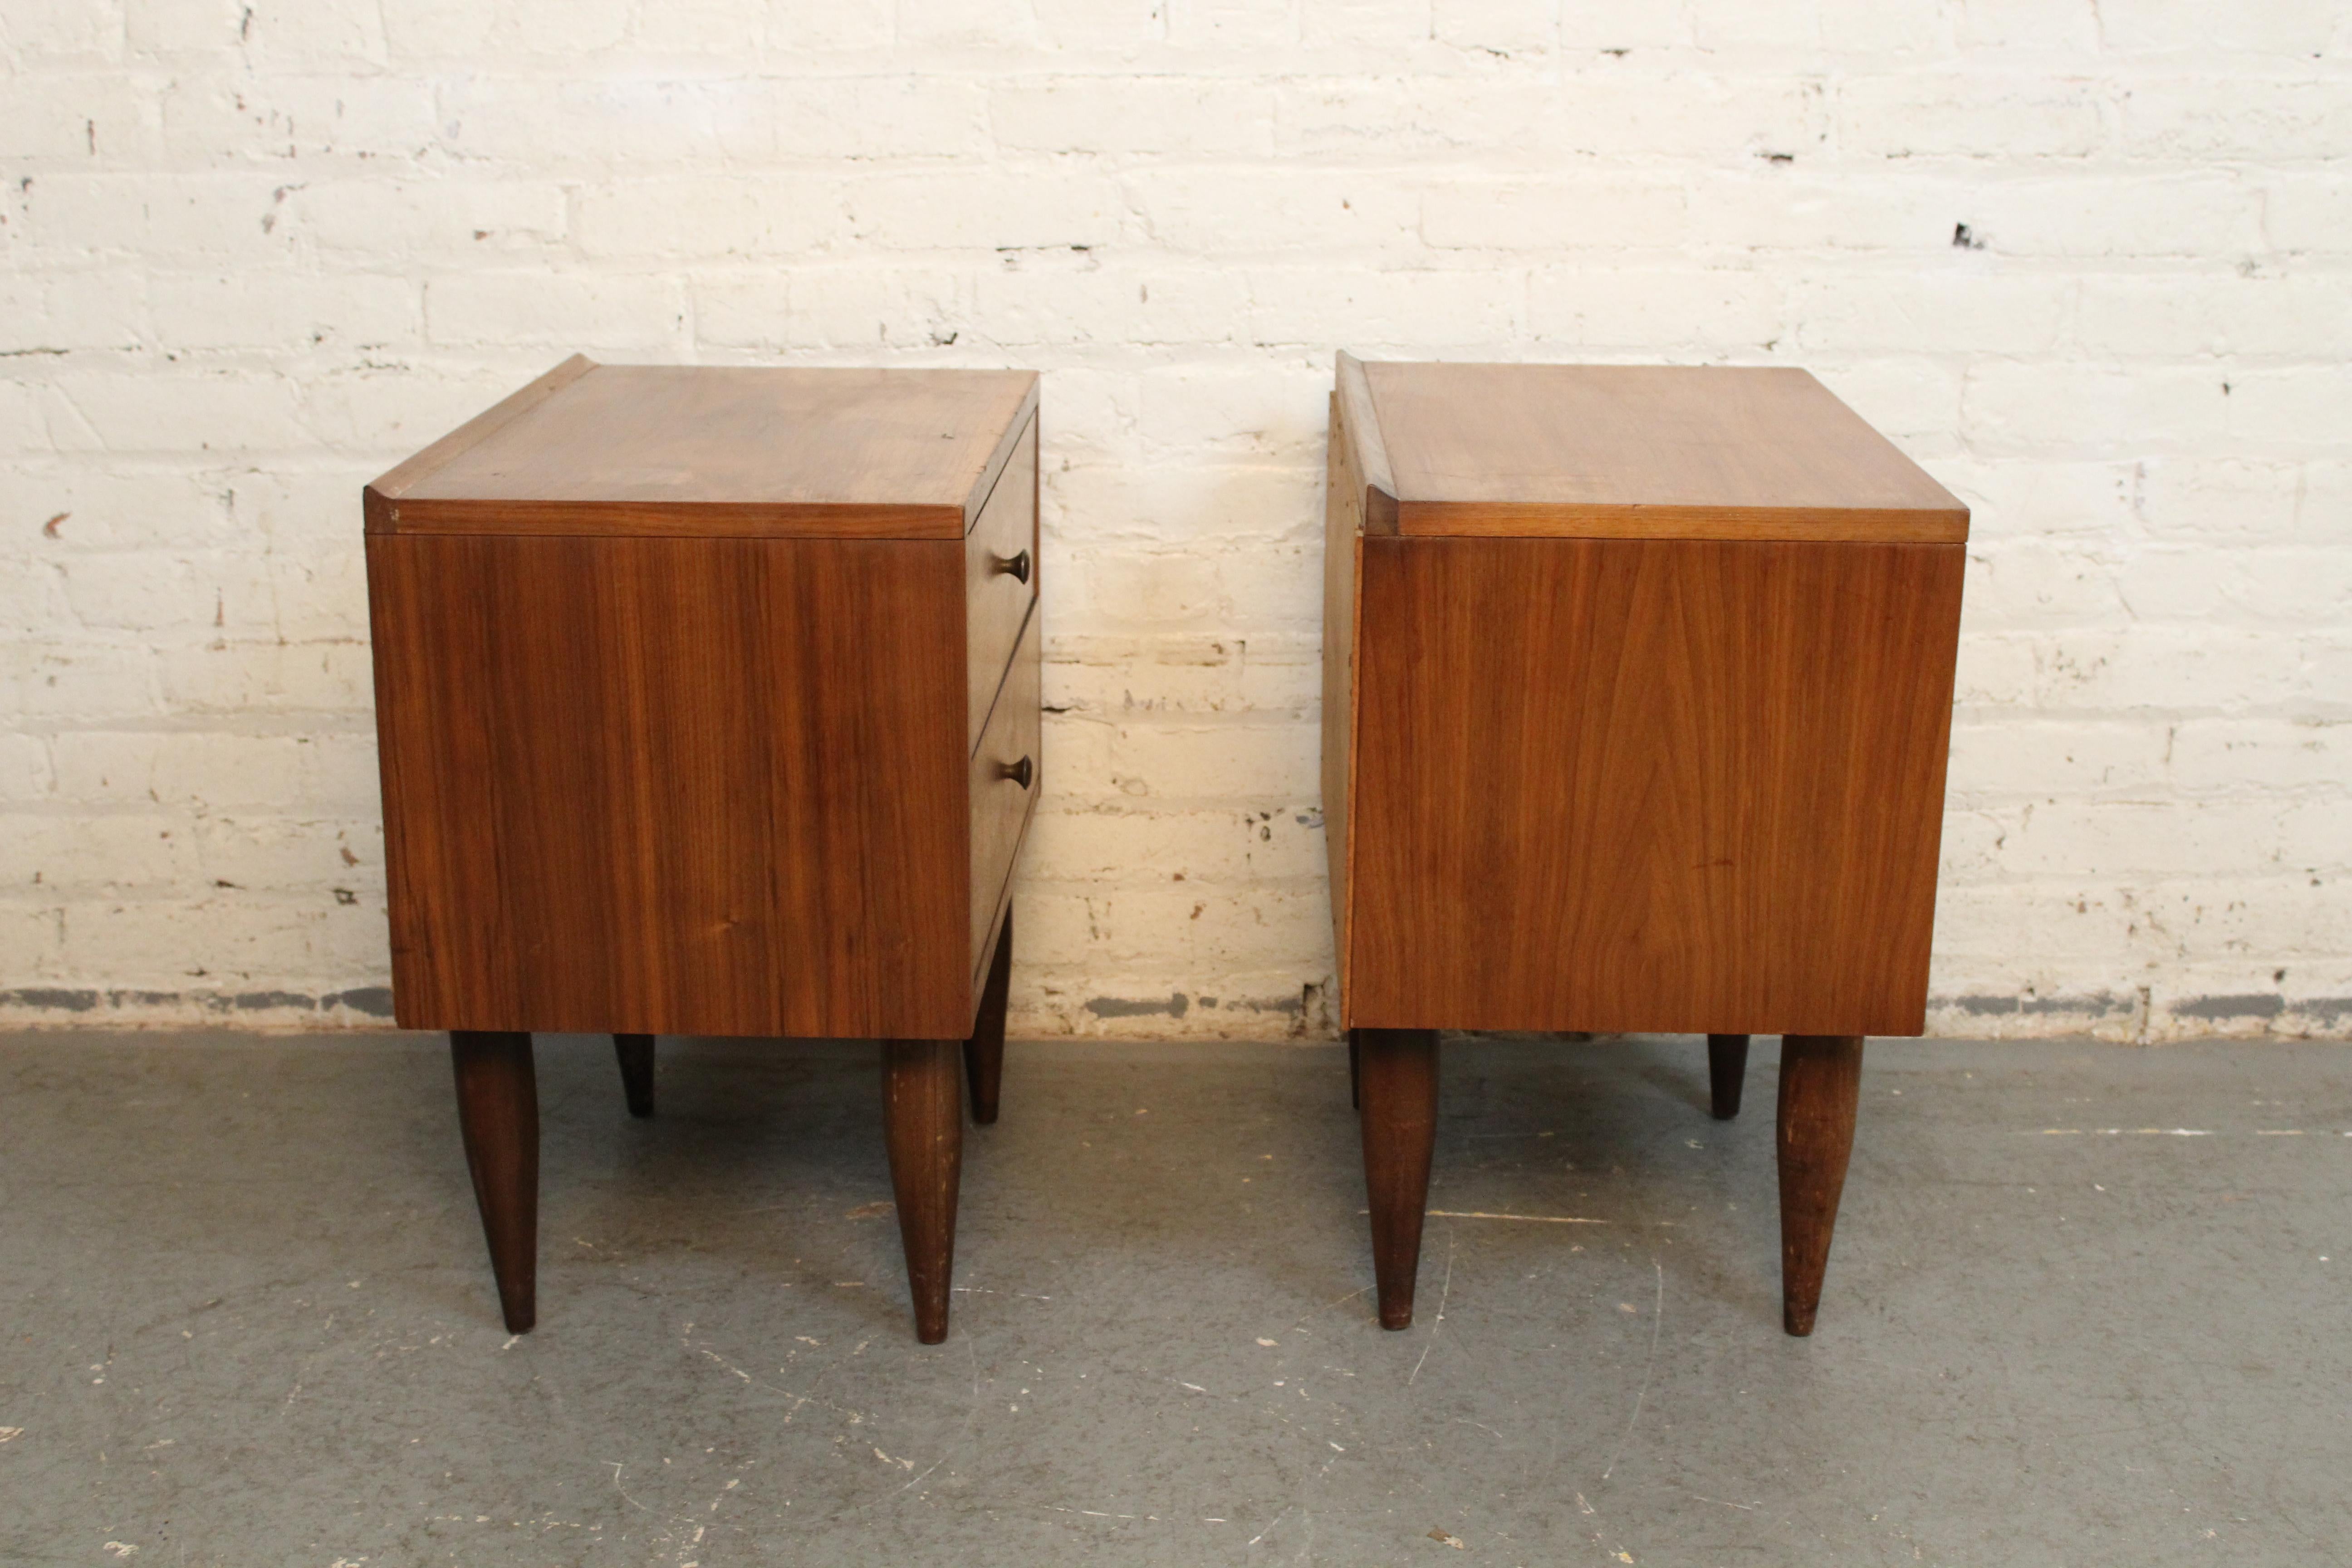 Turned Mid-Century American Walnut Nightstands by Harmony House For Sale